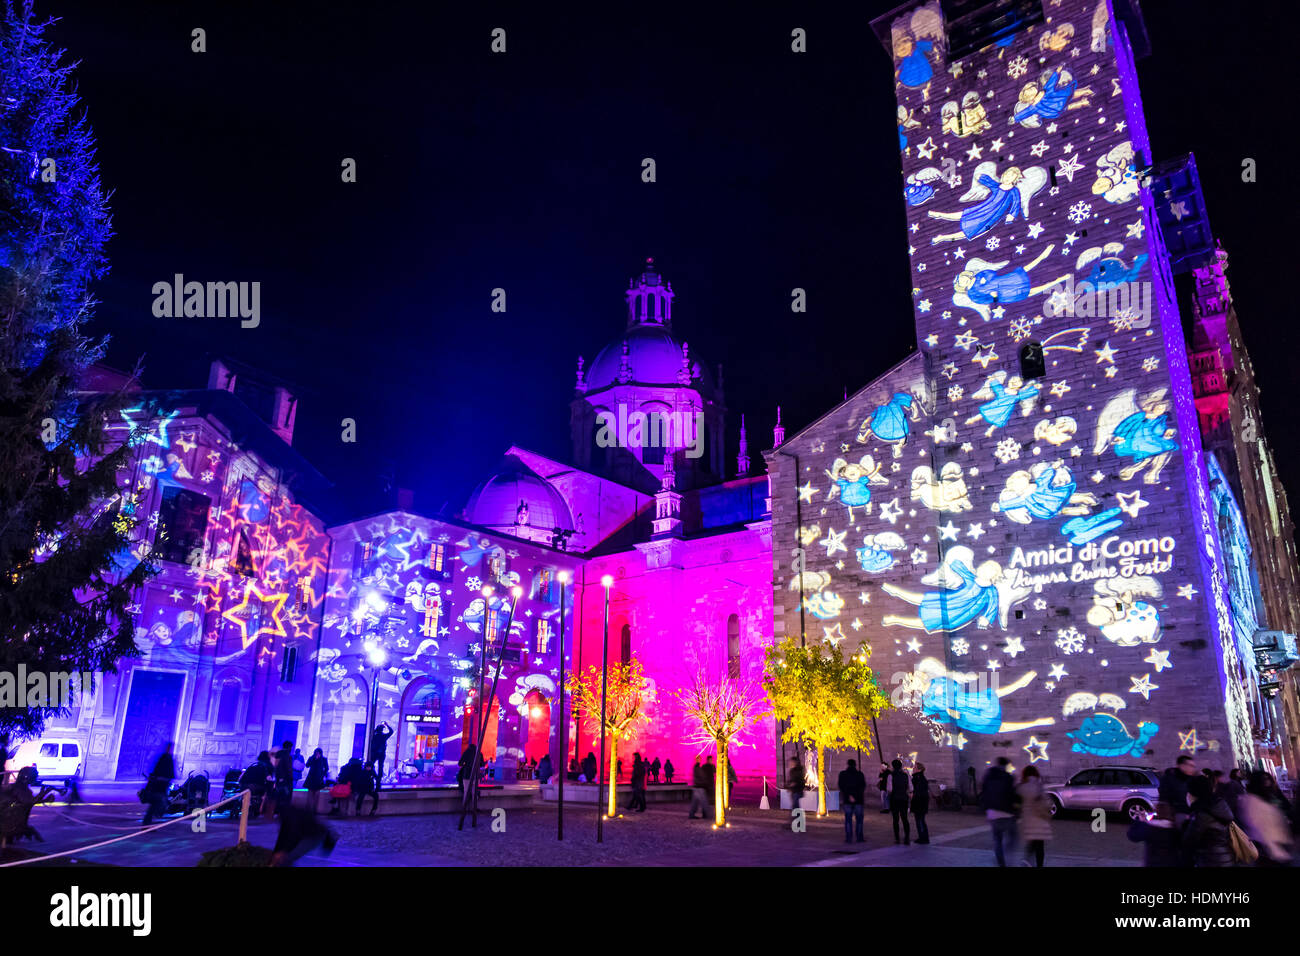 Festive Christmas decorations lights on facades of buildings on Piazza Duomo (Cathedral Square) in Como, Italy Stock Photo